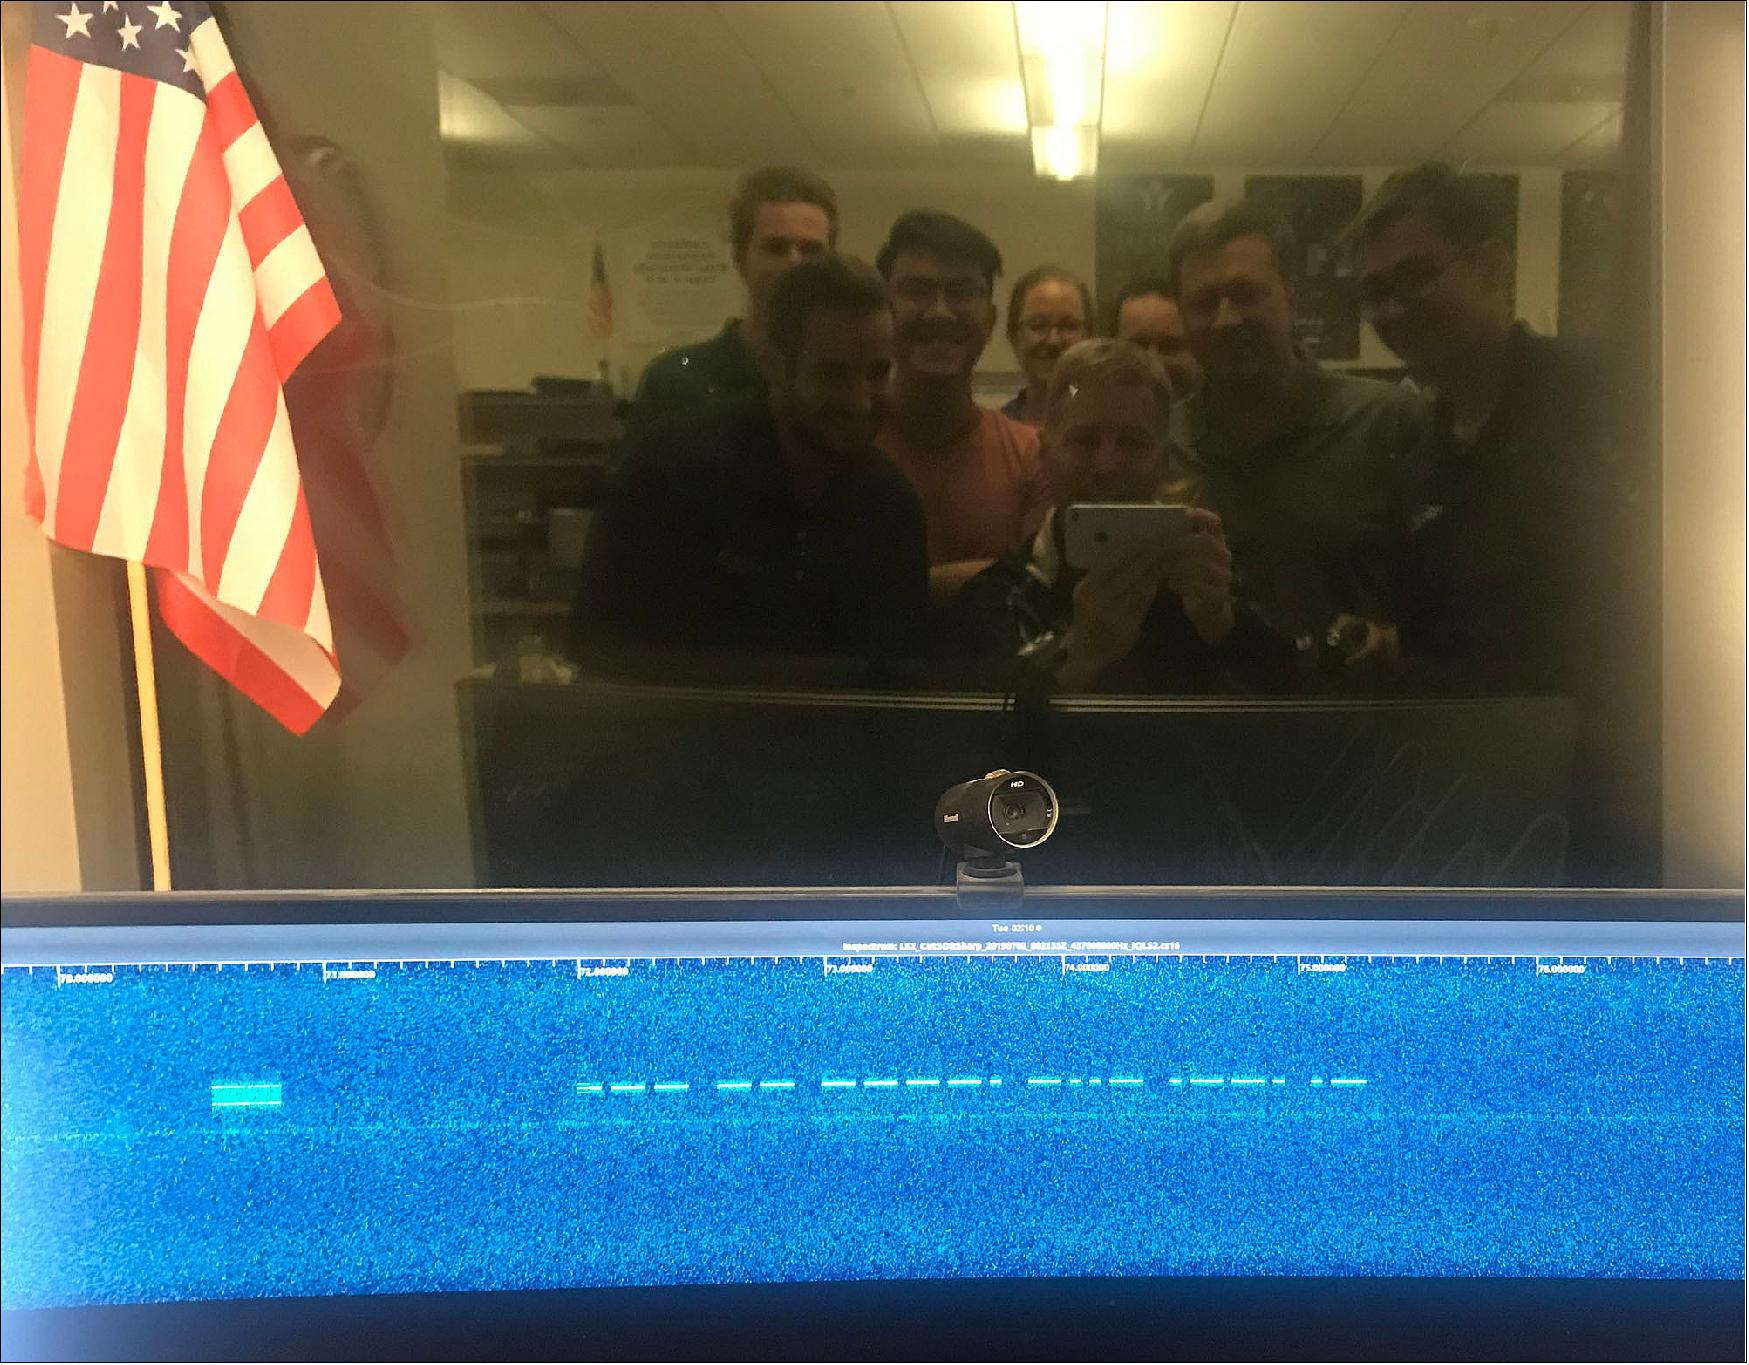 Figure 17: LightSail-2 Morse code selfie. Members of the LightSail-2 mission team can be seen in a reflection above a display showing the spacecraft’s Morse code beacon after it was first detected on 2 July 2019 at Cal Poly San Luis Obispo in California (image credit: Dave Spencer, The Planetary Society)